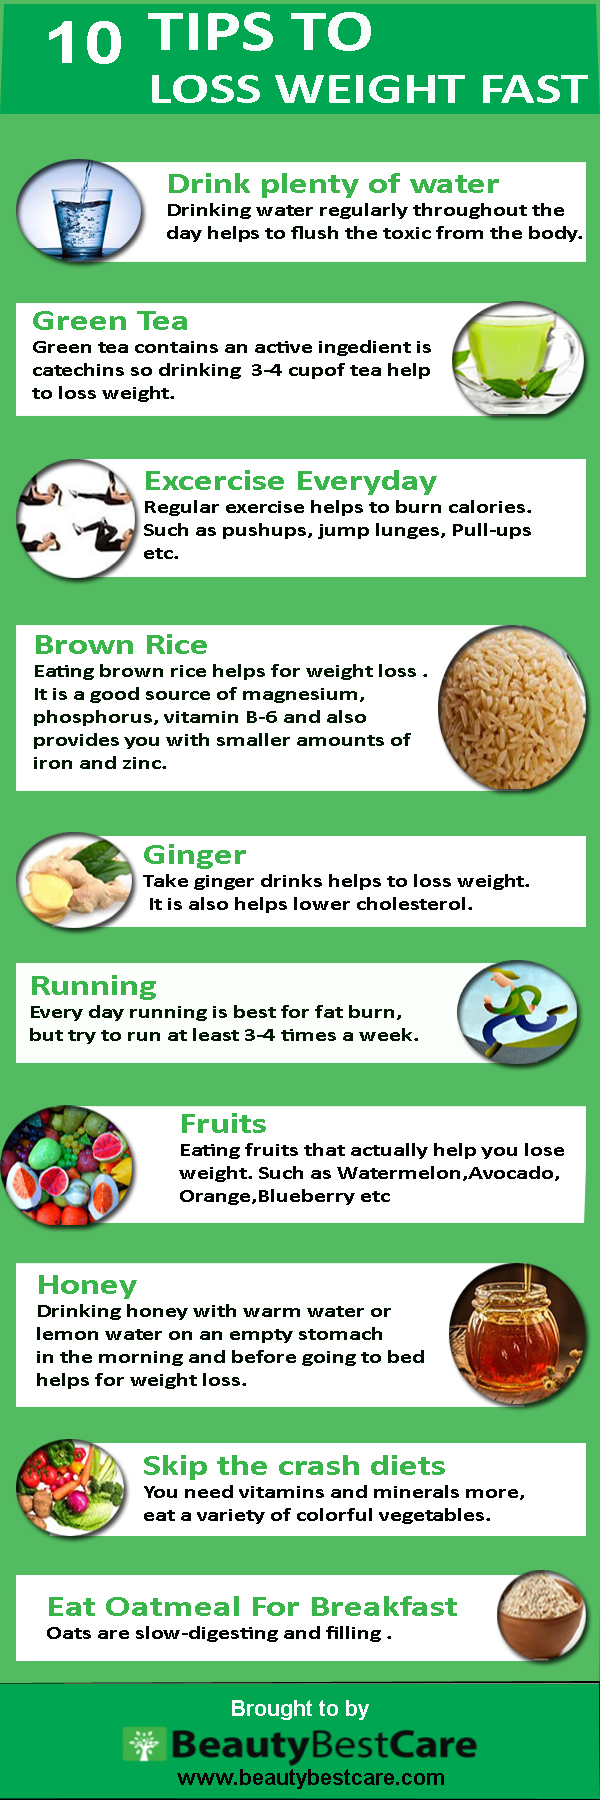 17 Weight  Loss Tips  For Women Infographic BeautyBestCare